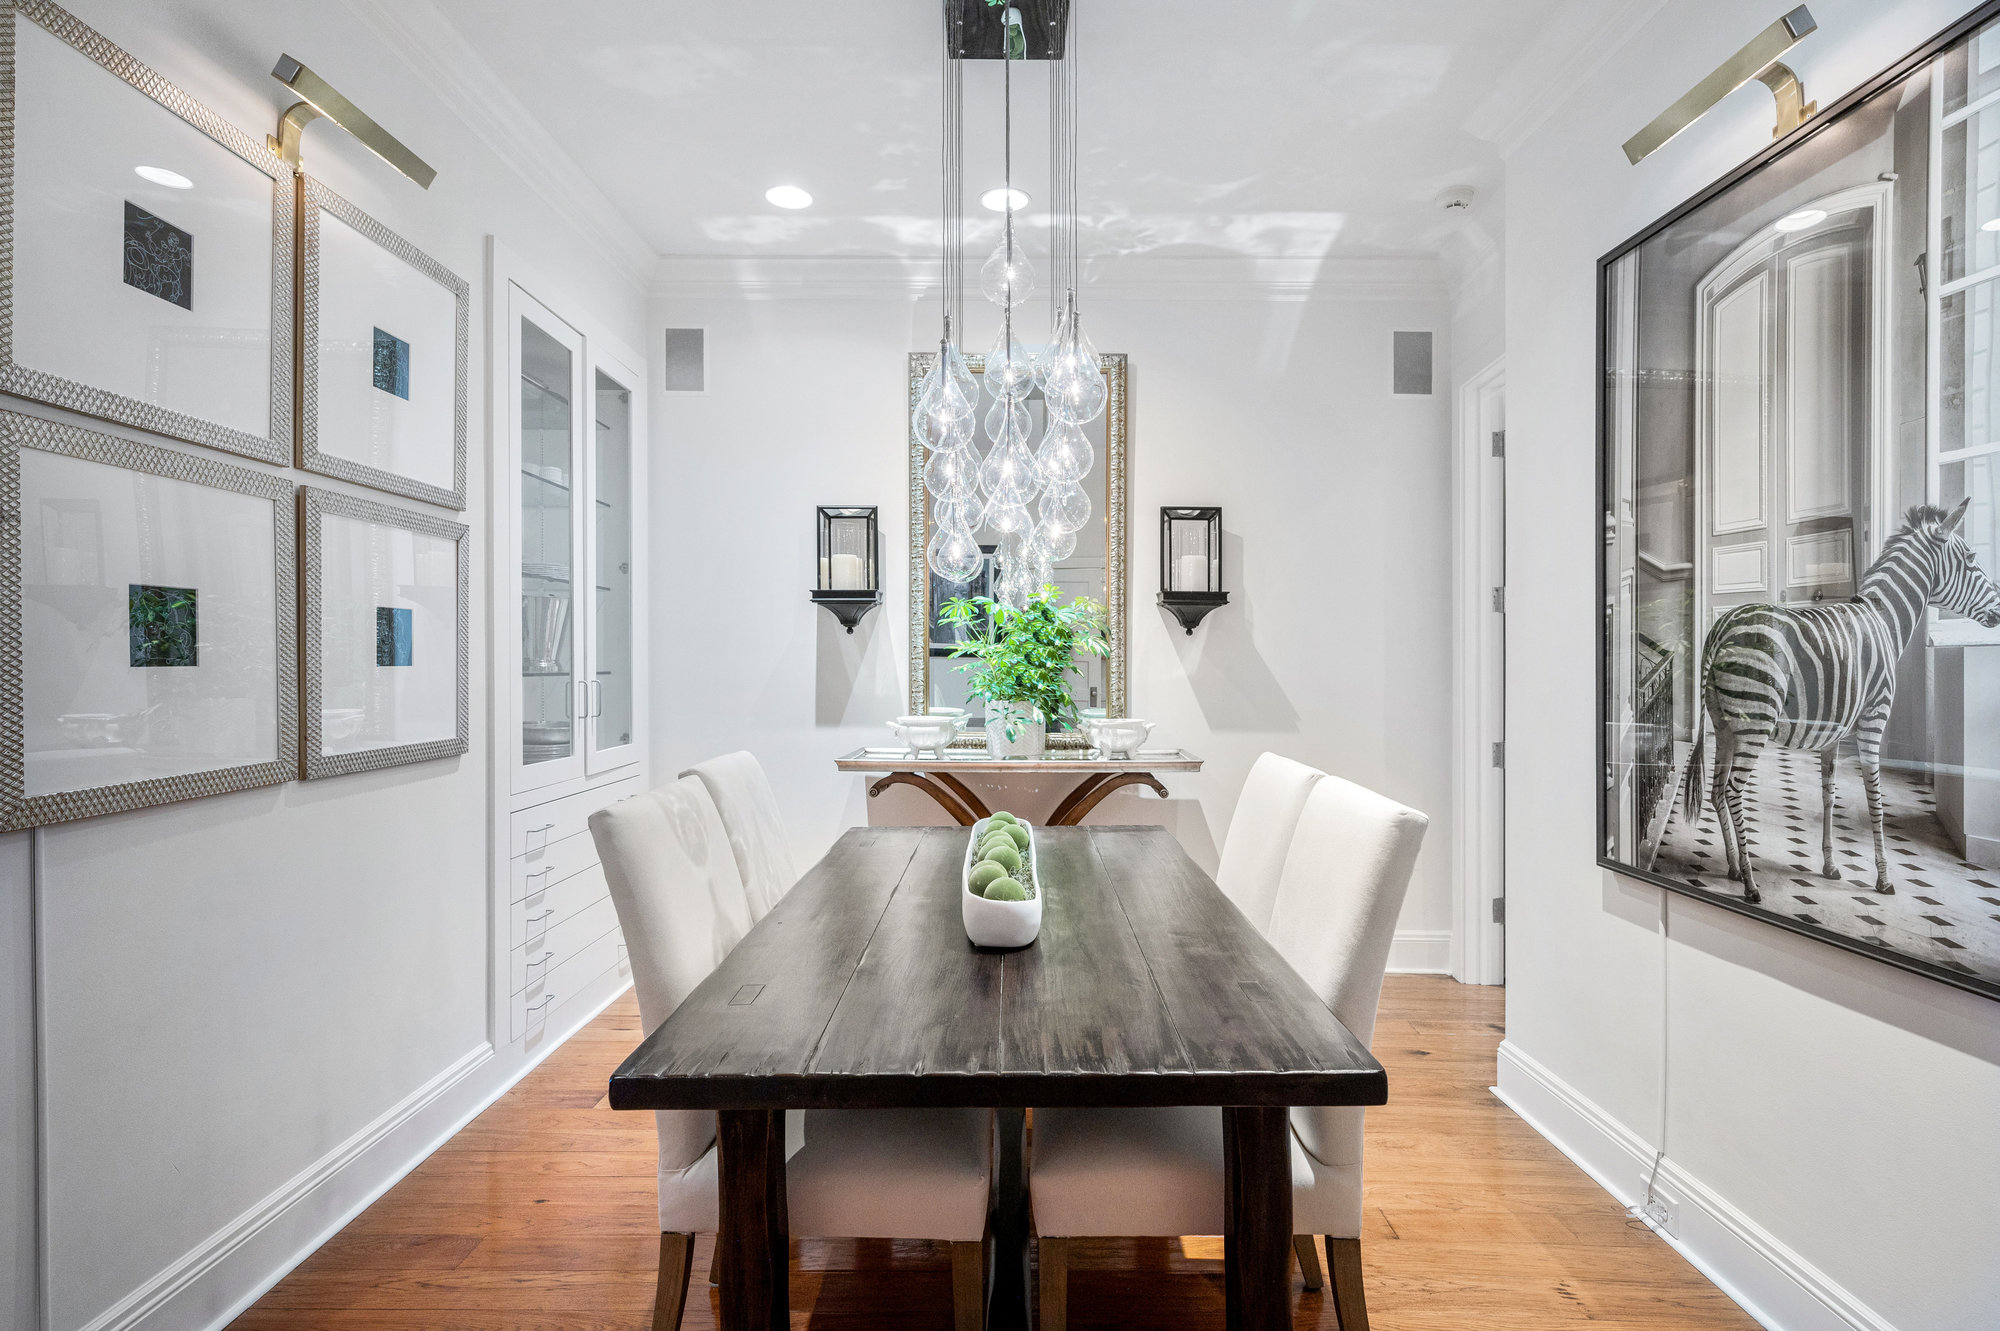 Property Photo: This is a centered photo showing the dining table. It is rectangular and fits 4. There is amazing light fixture over table. 